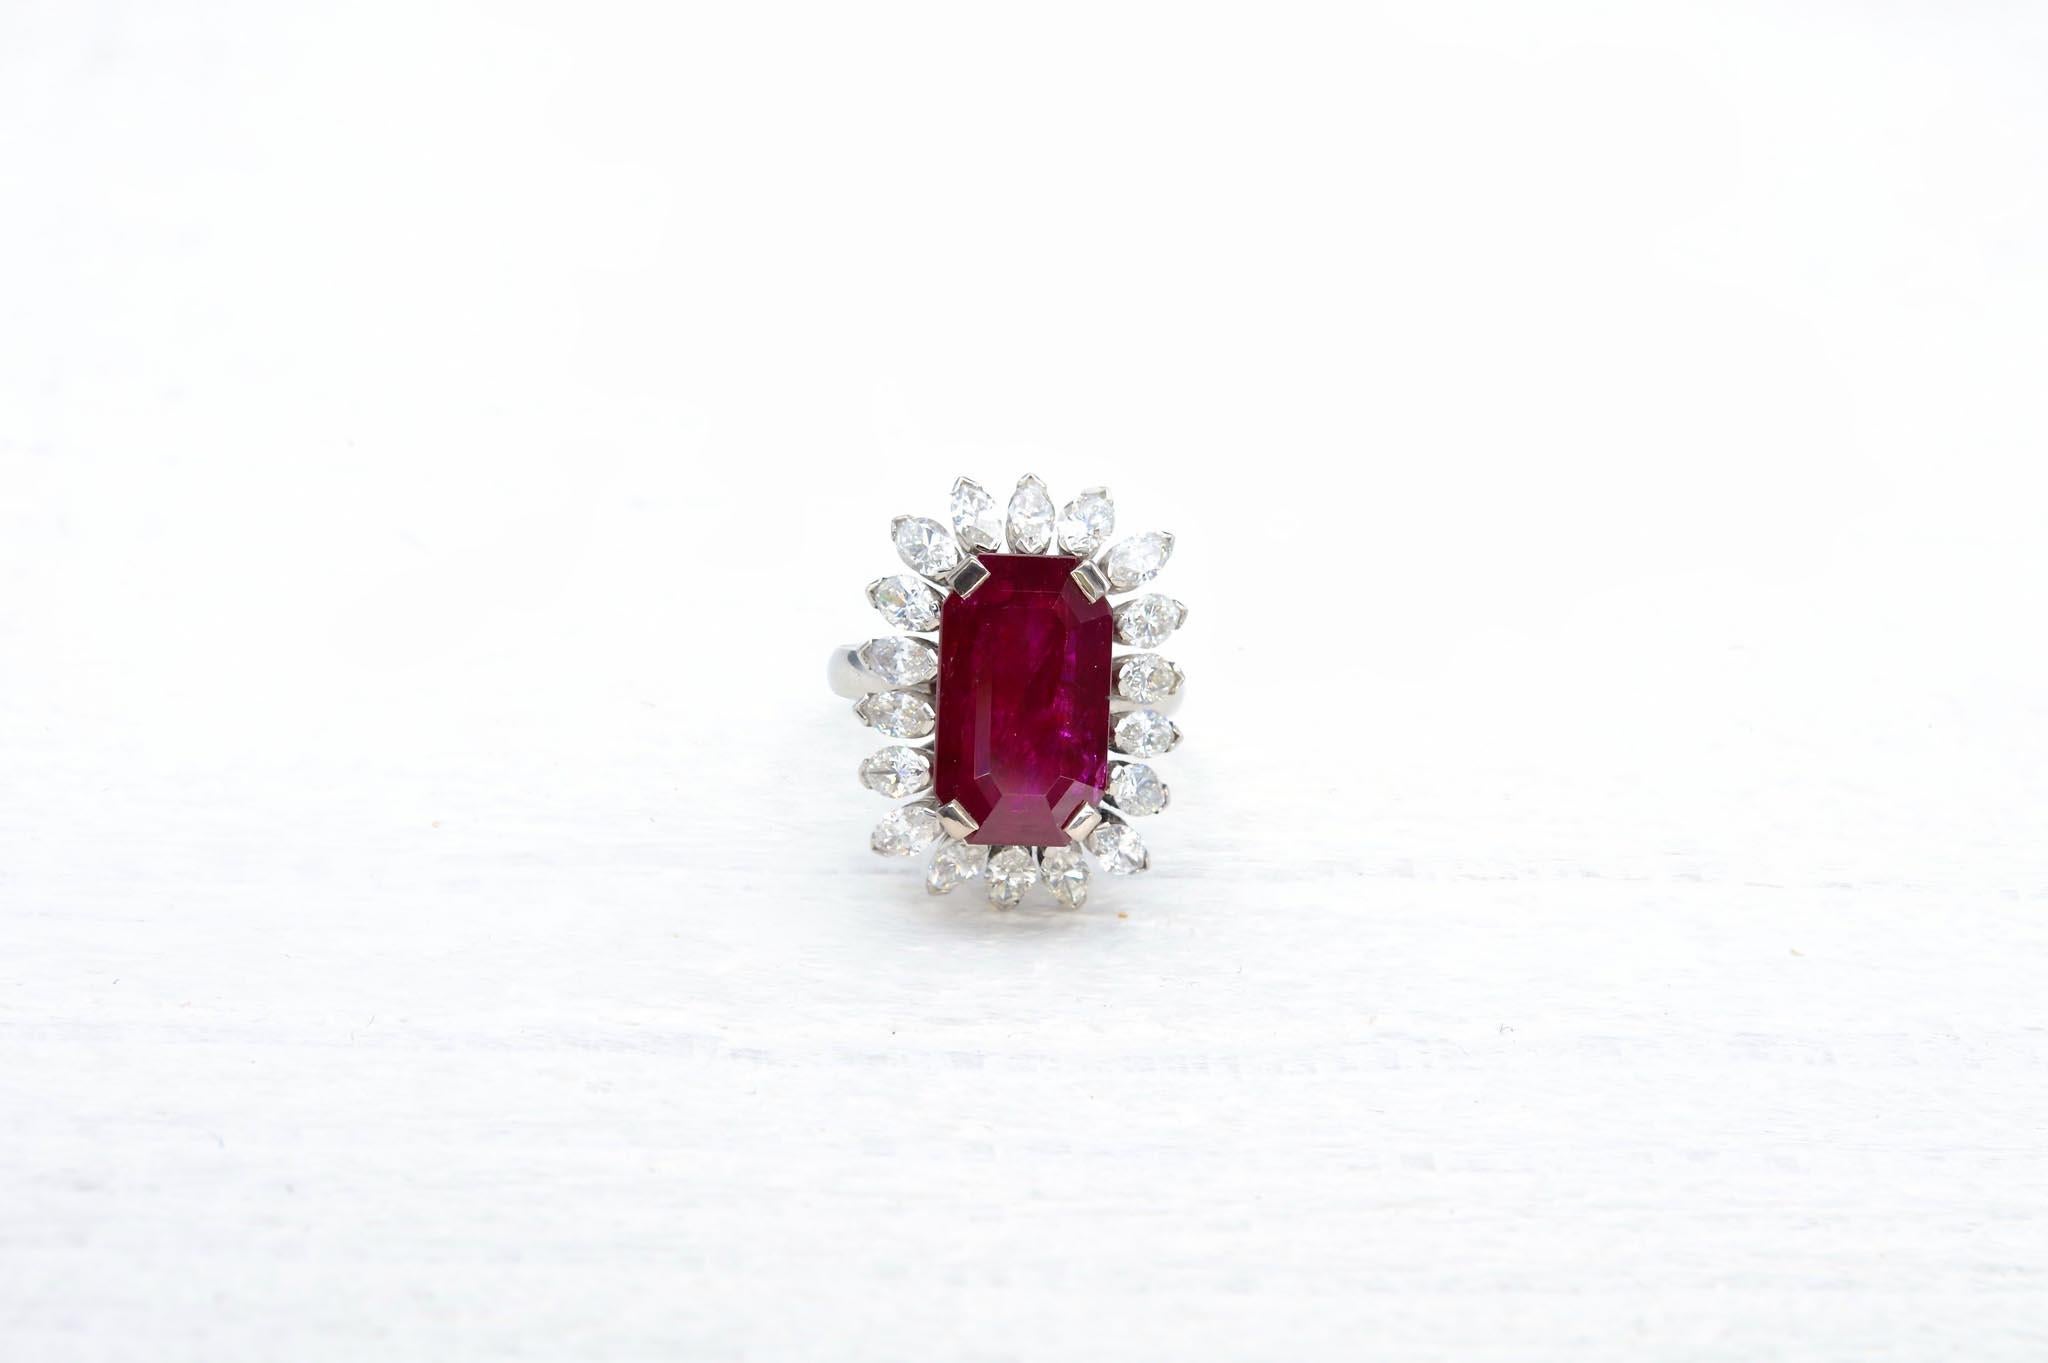 Stones: Burmese Ruby of 10.80 carats unheated (SSEF Certificate)
and shuttle diamonds for a total weight of 5.50 carats.
Material: 18k white gold
Dimensions: 2.5 x 1.8 cm
Period: 1960
Weight: 16.3g
Size: 59 (free sizing)
– Laboratory